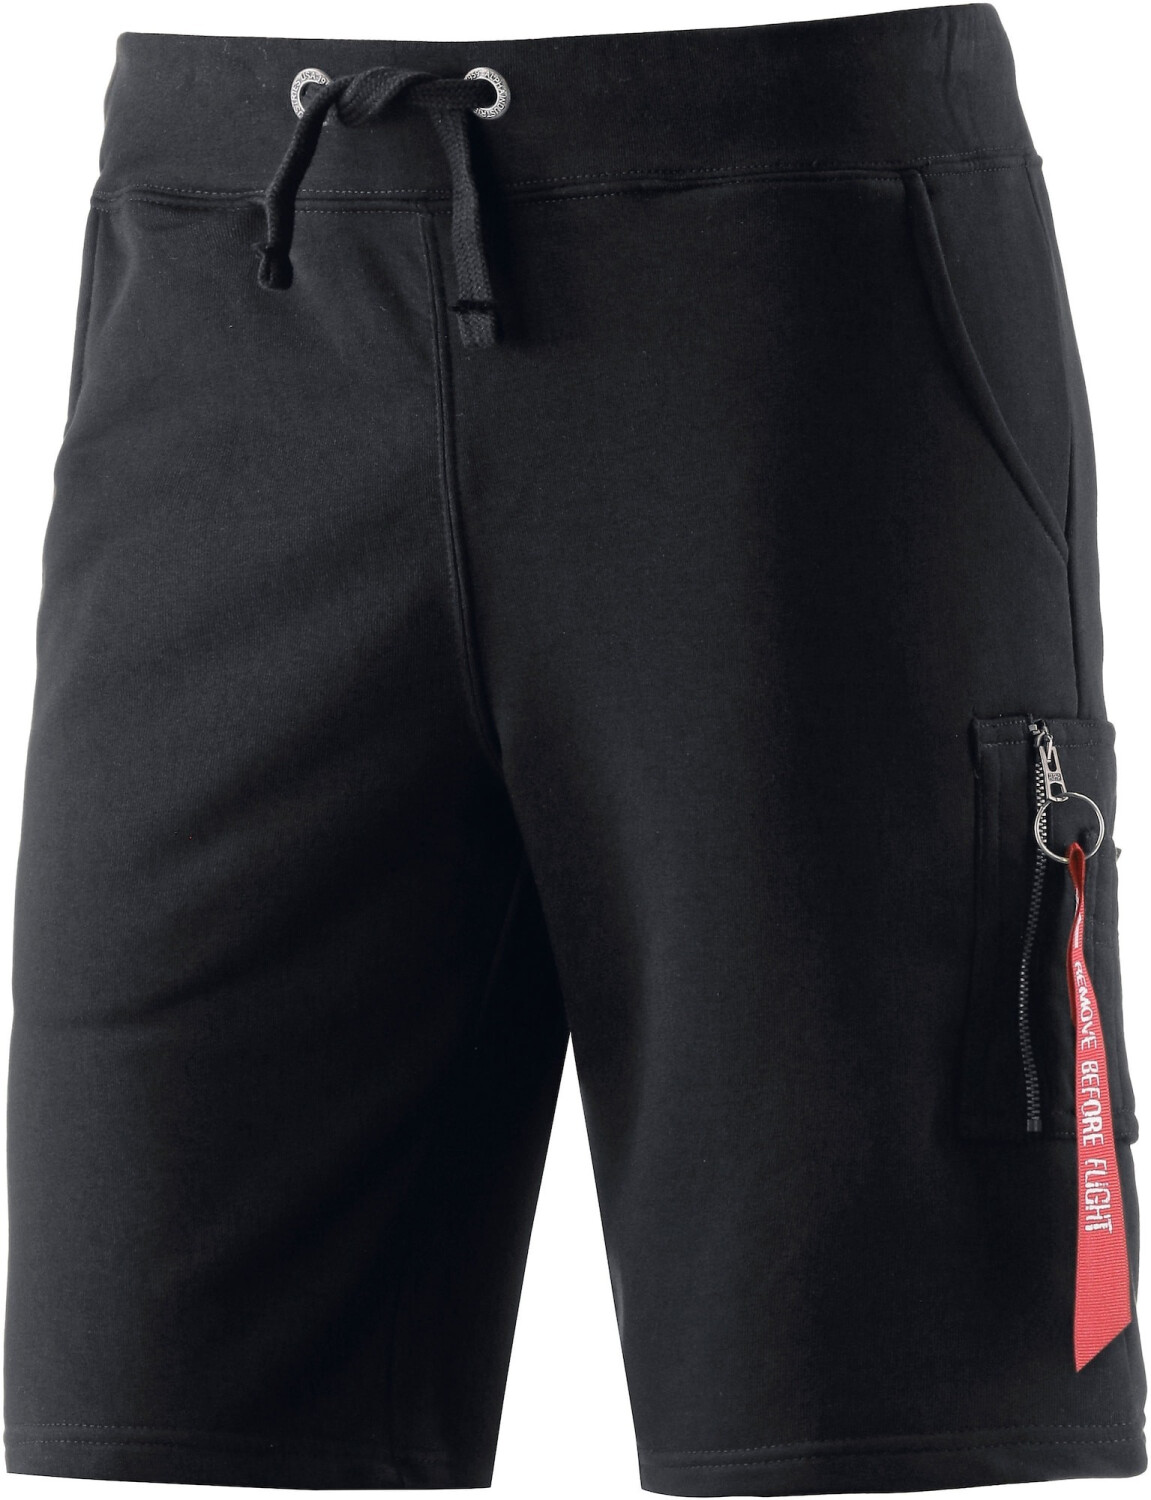 from Shorts Alpha X-Fit Men\'s £23.65 (Today) (166301) Industries Best Deals – Buy on